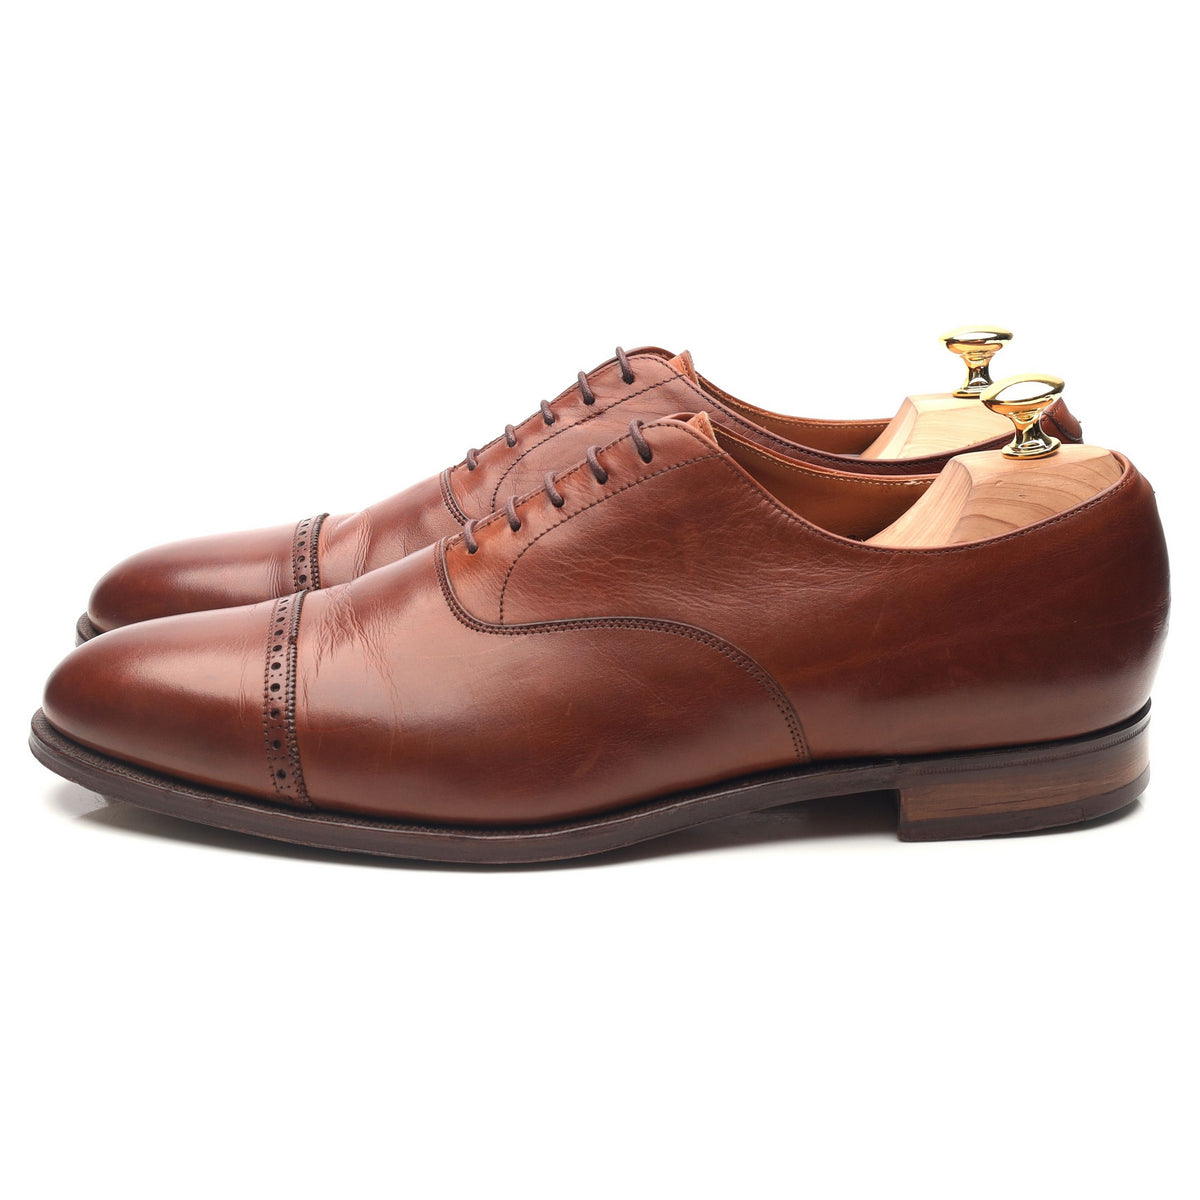 Tan Brown Leather Oxford UK 10.5 E US 11.5 D